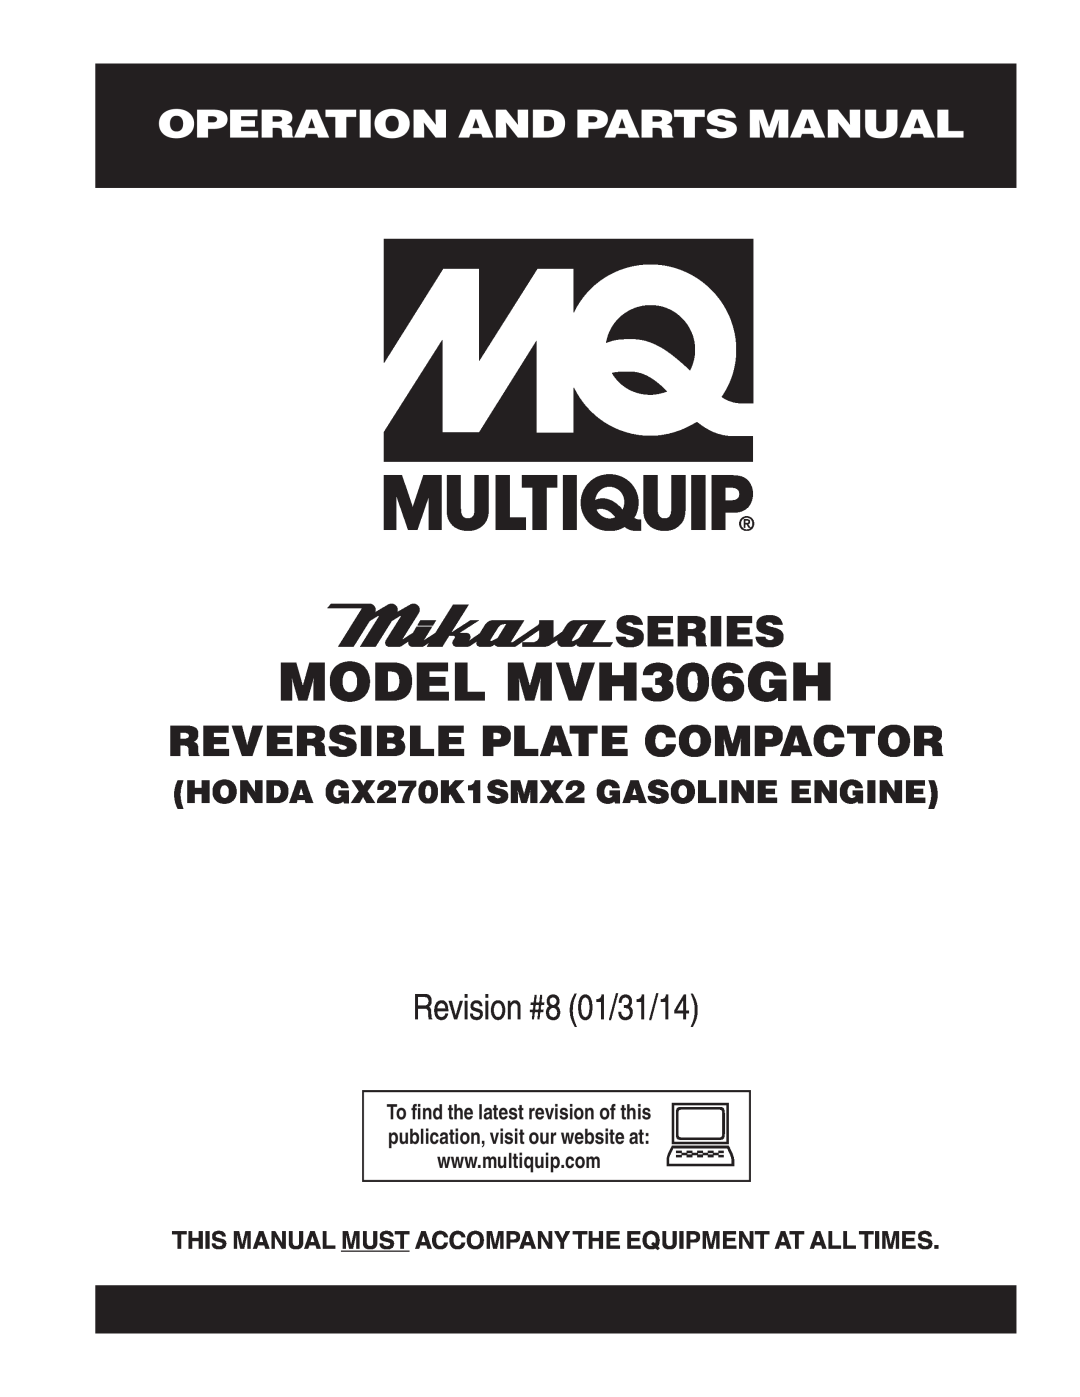 Multiquip manual Operation And Parts Manual, MODEL MVH306GH, Series, Reversible Plate Compactor, Revision #8 01/31/14 